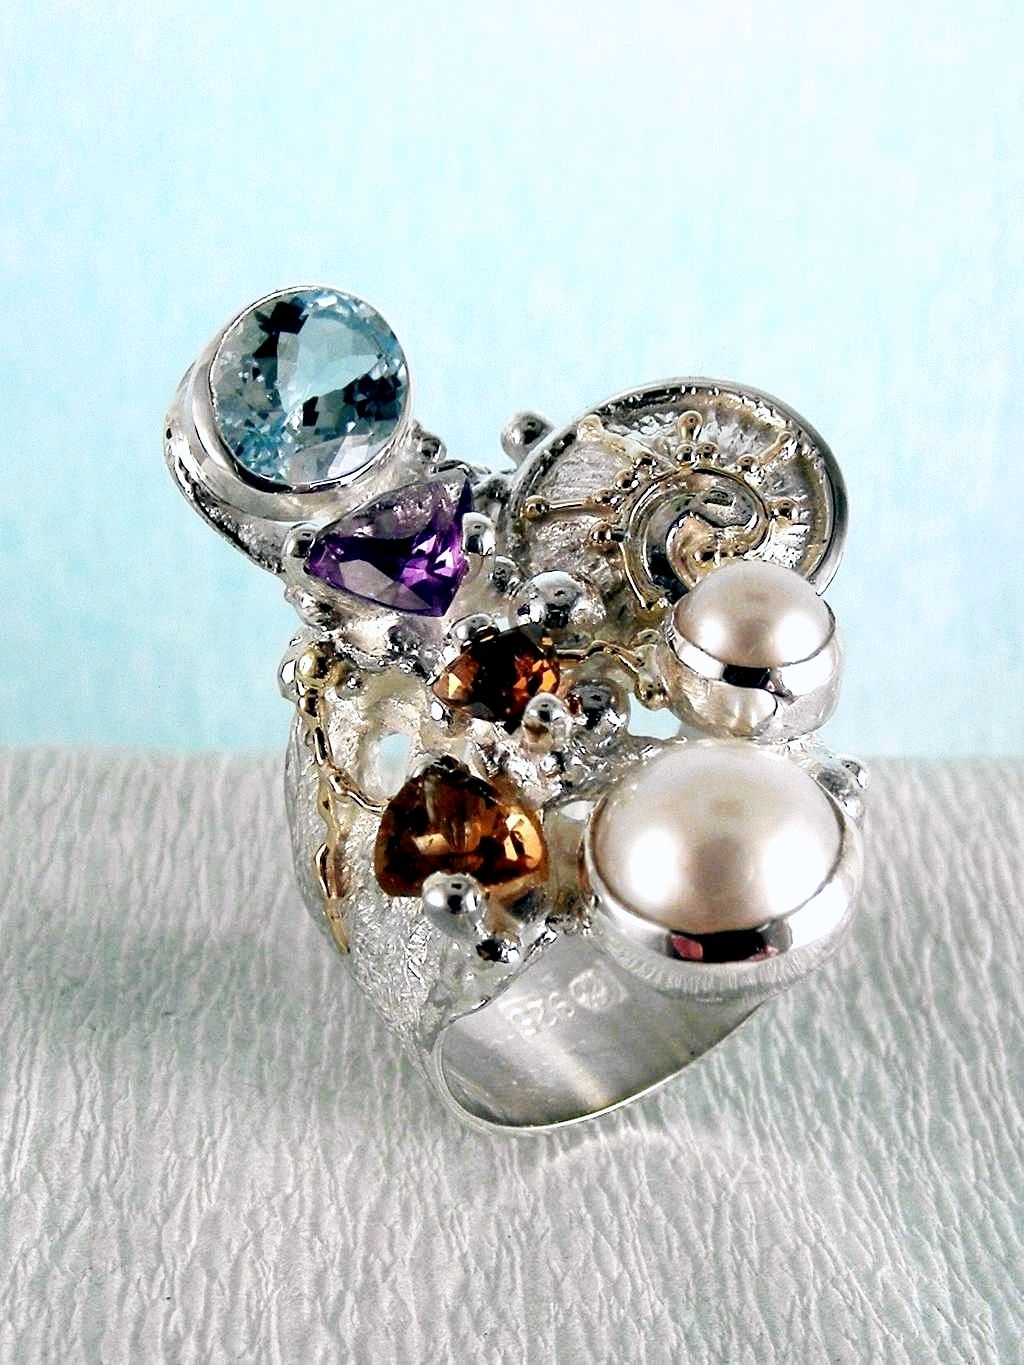 gregory pyra piro art jewellery, silver and gold jewellery with gemstones, gold and silver jewellery with gemstones and pearls, Band #Ring 2050